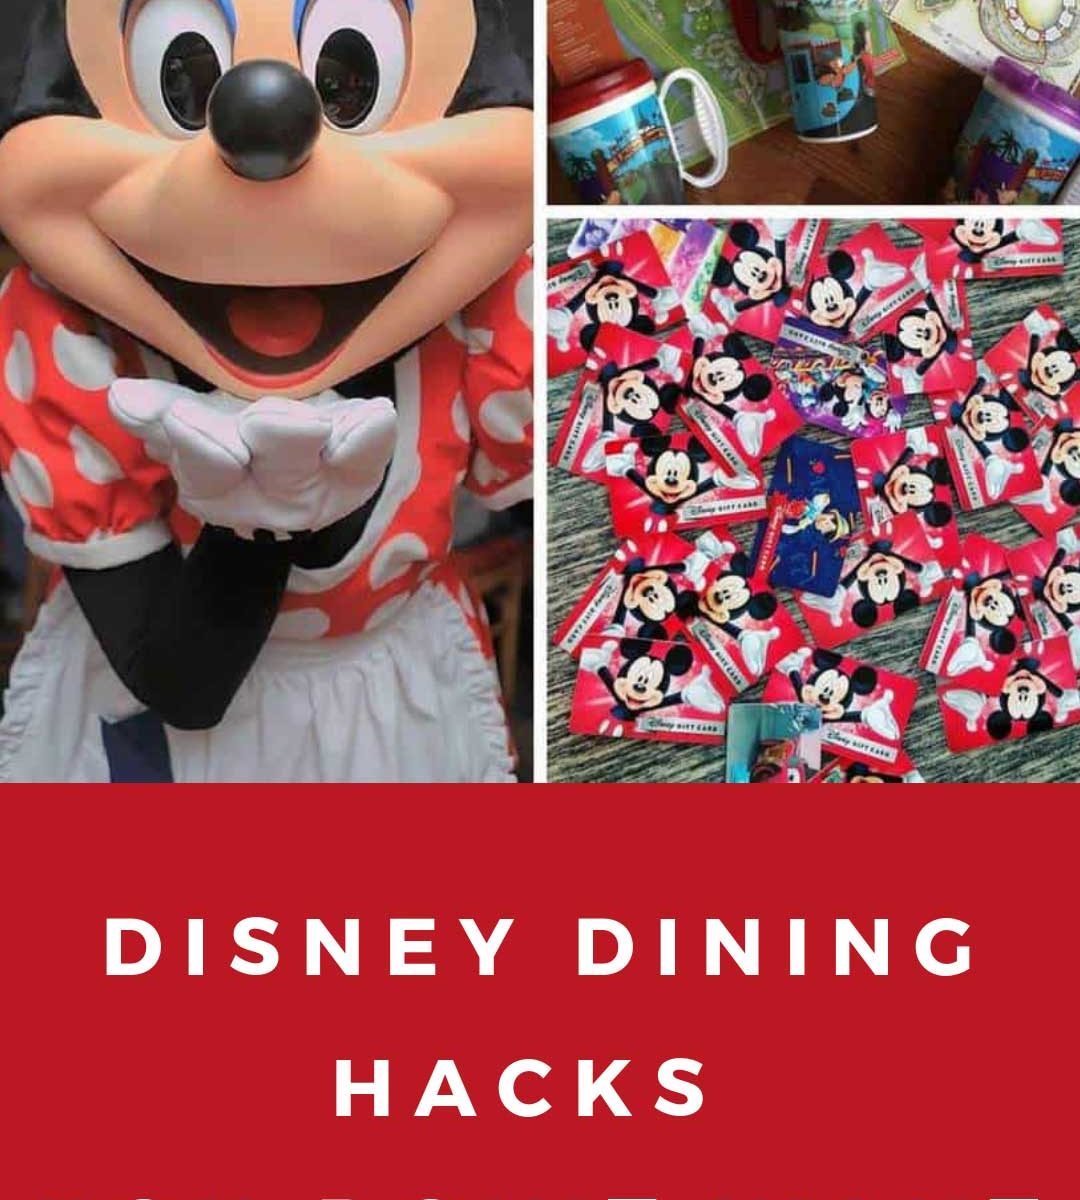 24 Disney Dining Hacks You'll Regret Not Knowing!